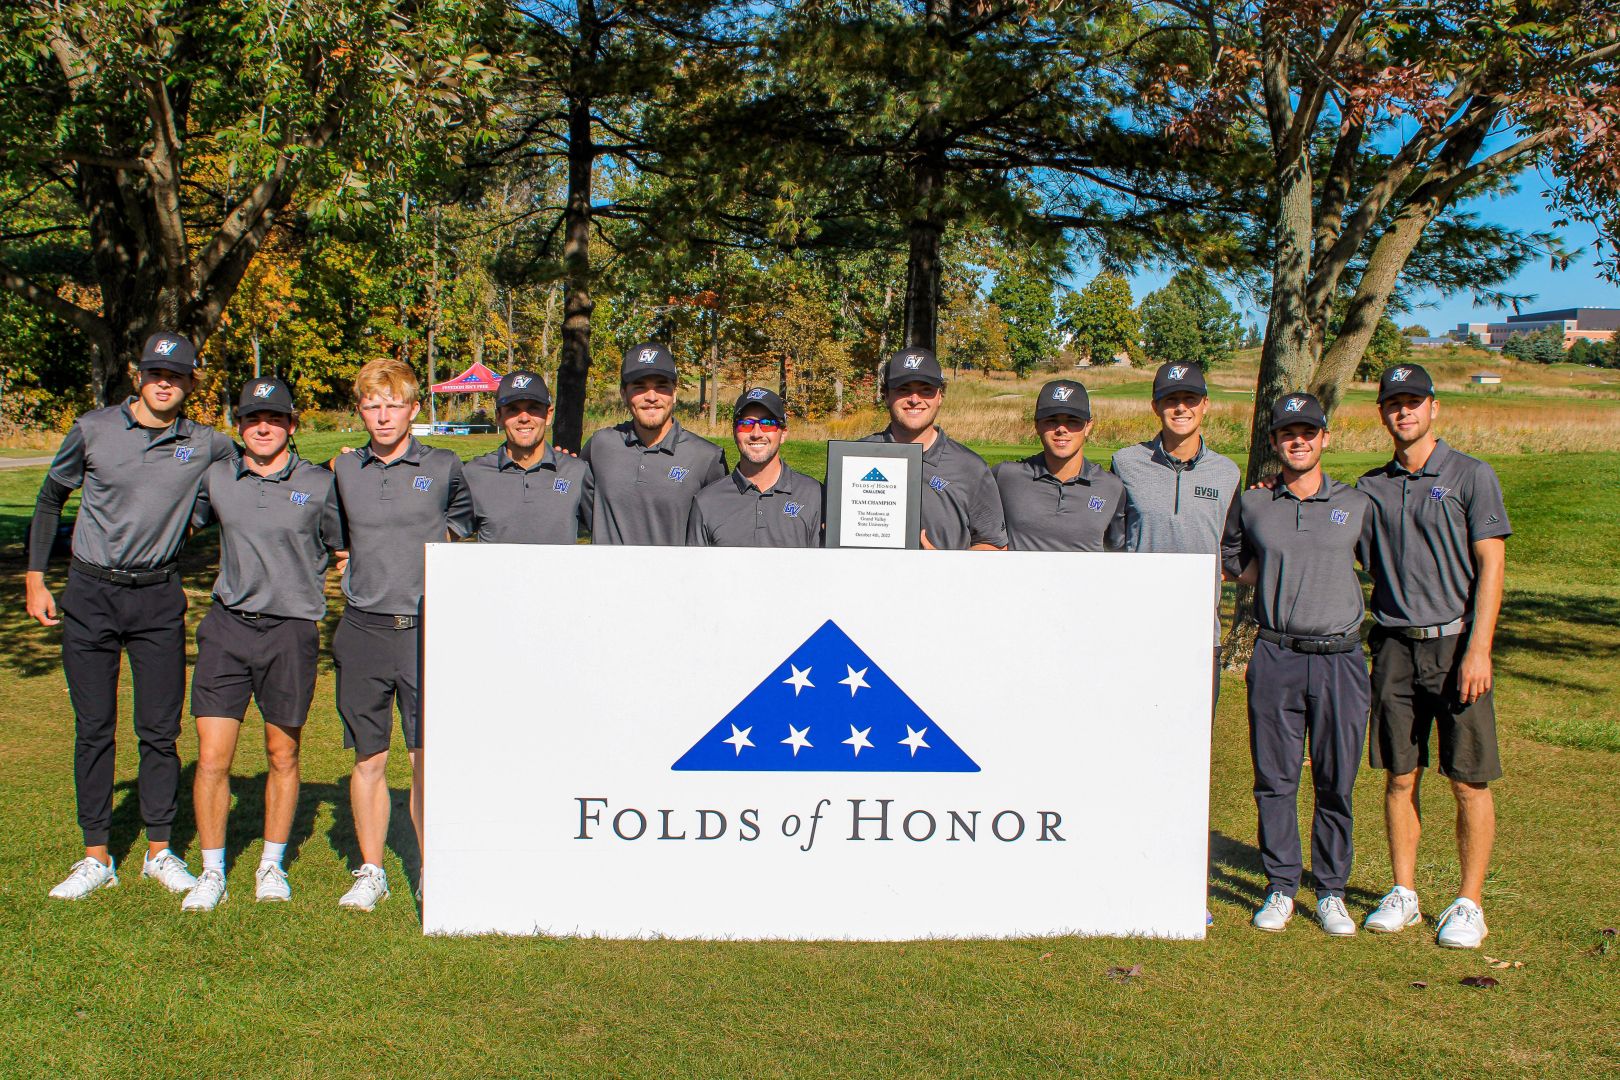 Grand Valley State, DeLong Win Inaugural Folds of Honor Challenge